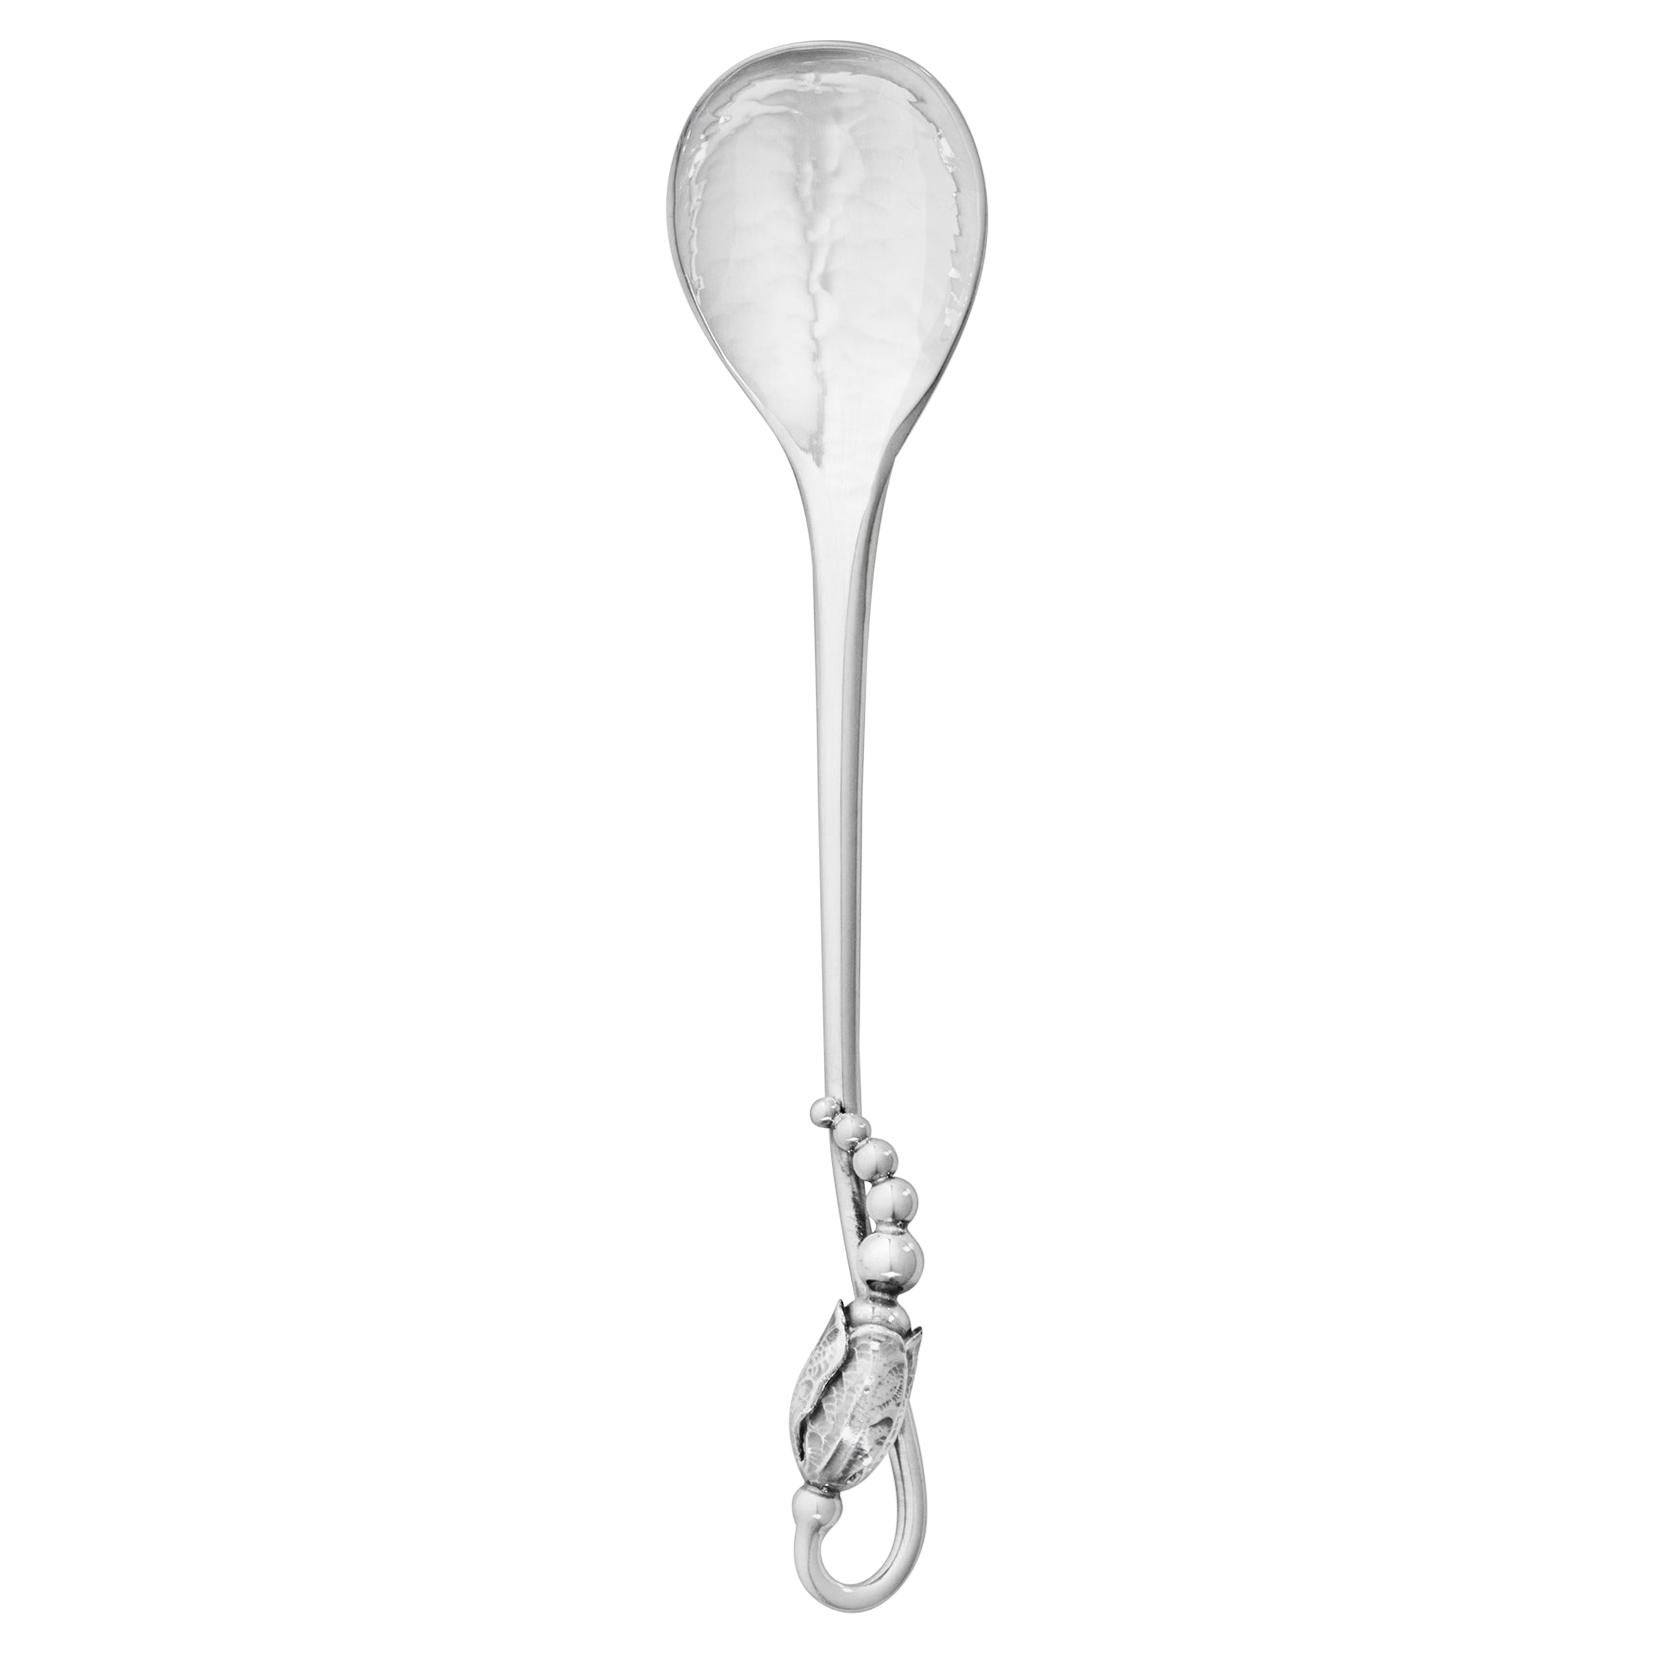 Georg Jensen Handcrafted Sterling Silver Blossom Coffee Spoon